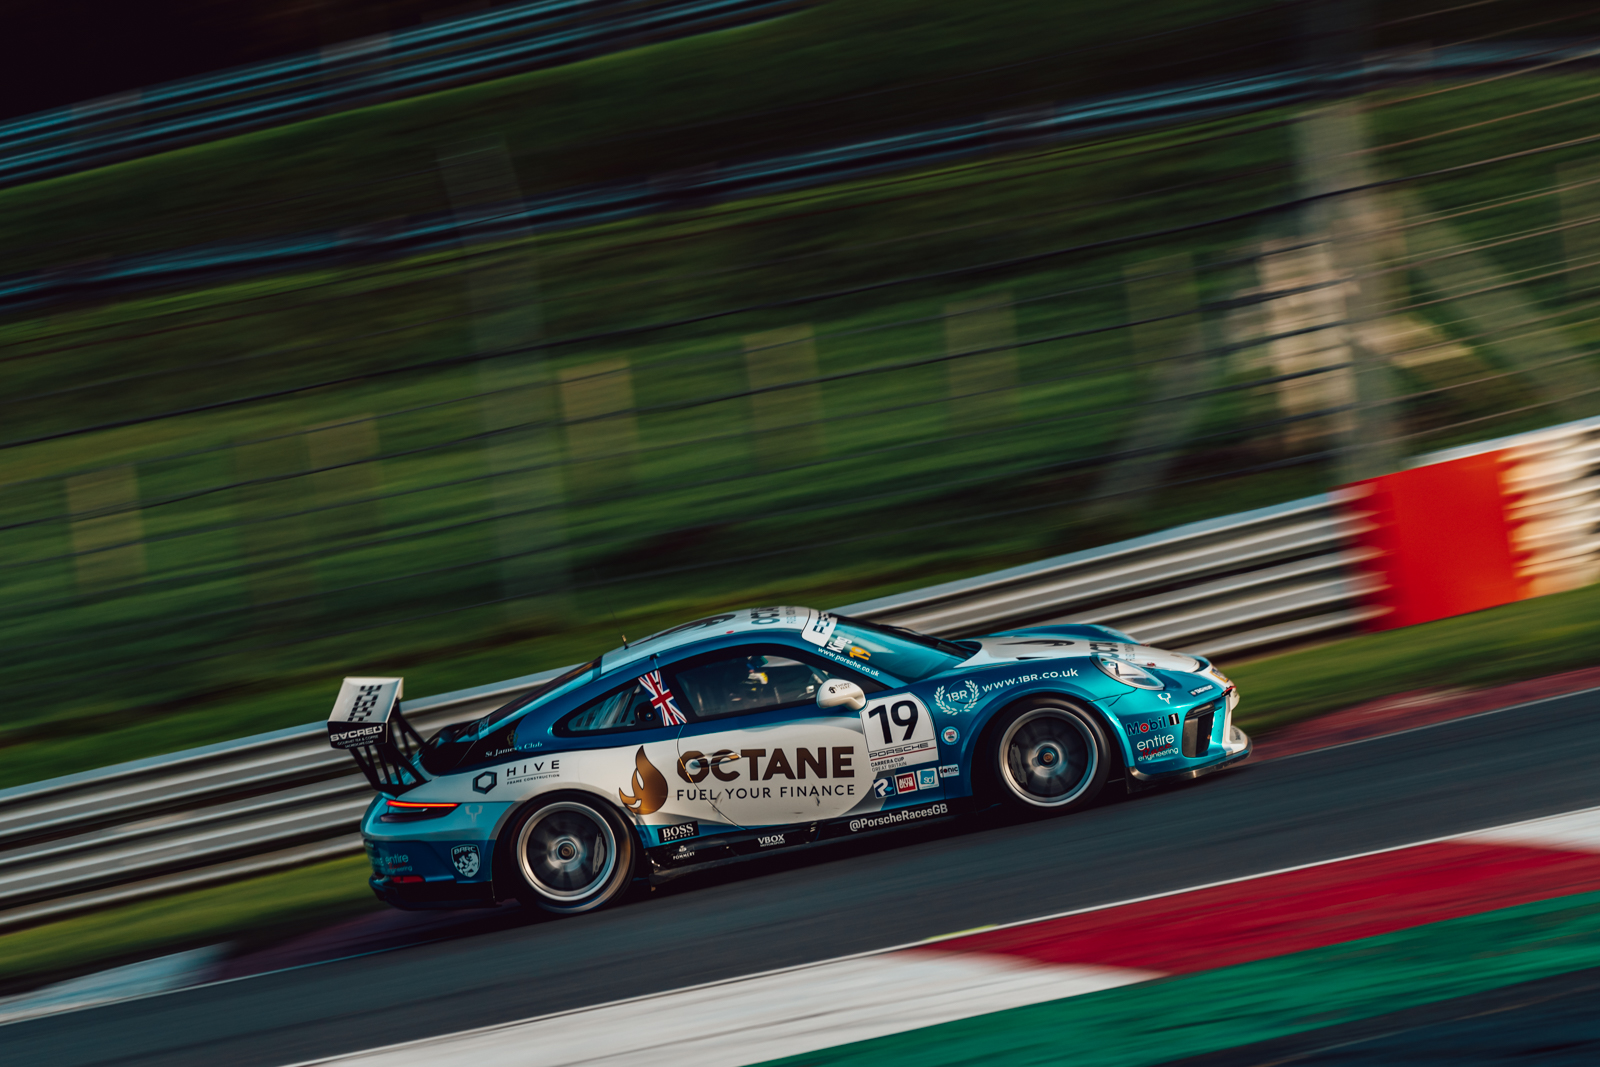 Octane Finance to support Harry King’s Carrera Cup GB defence